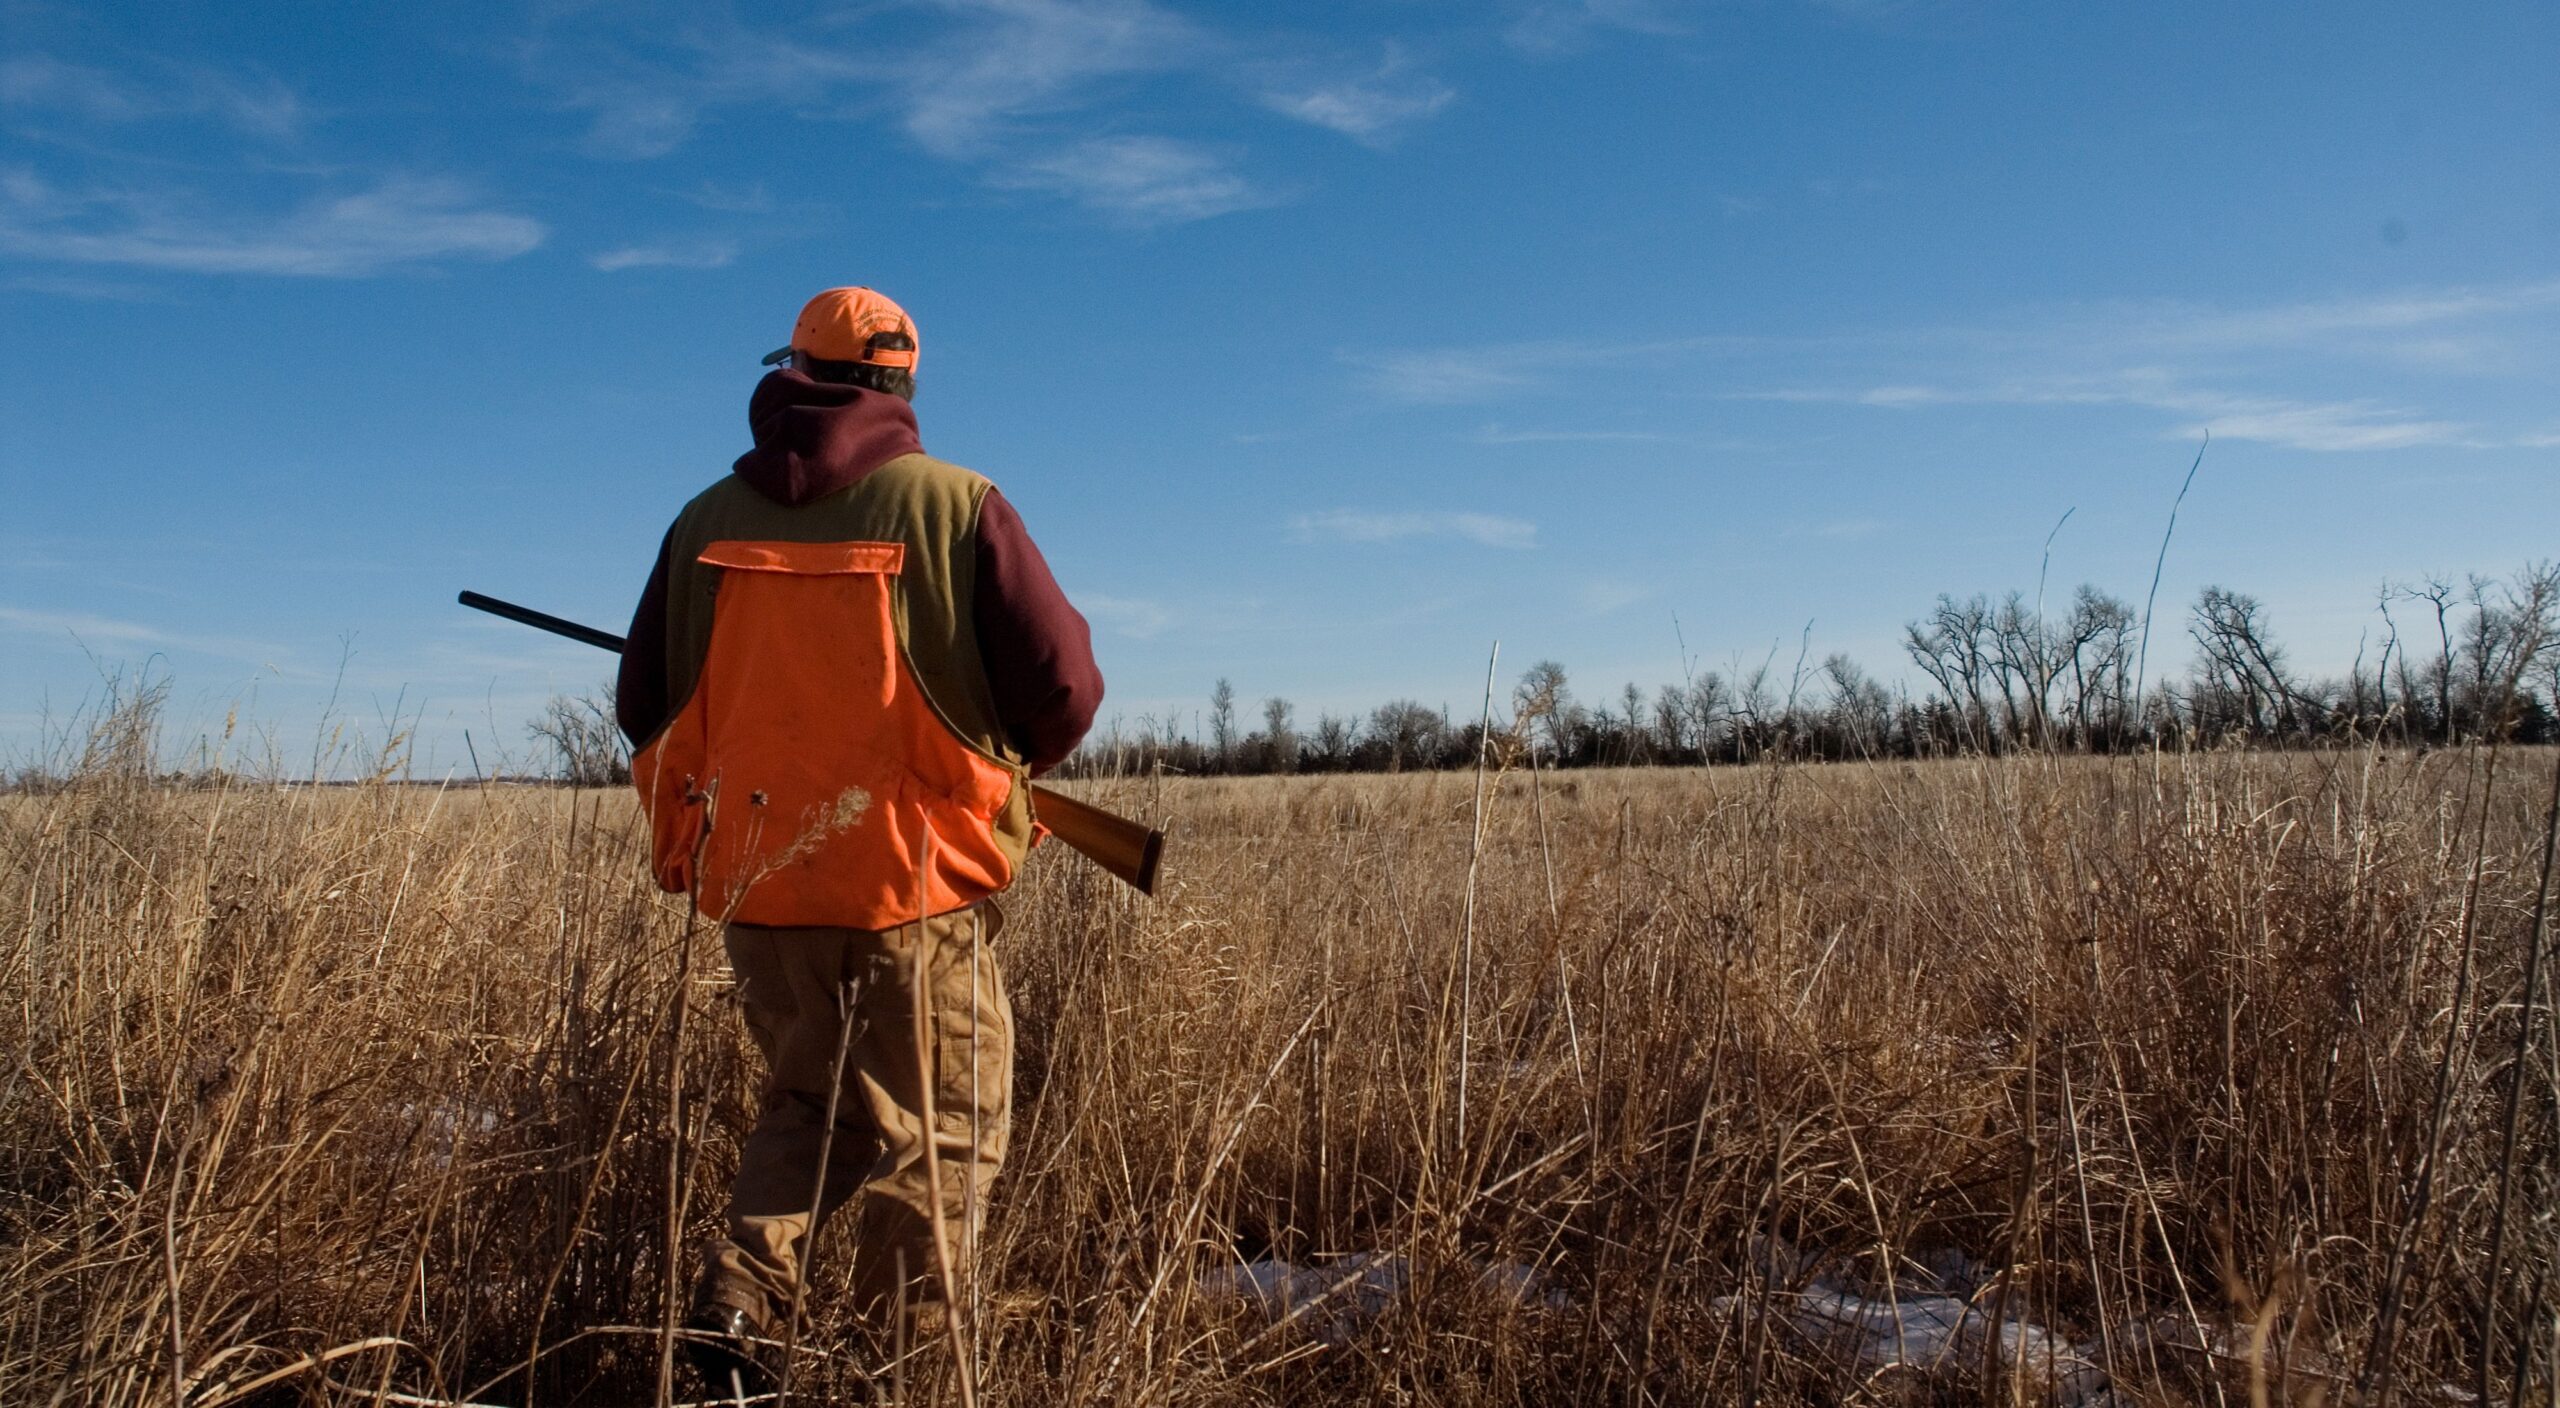 How Does Overhunting Affect the Environment?